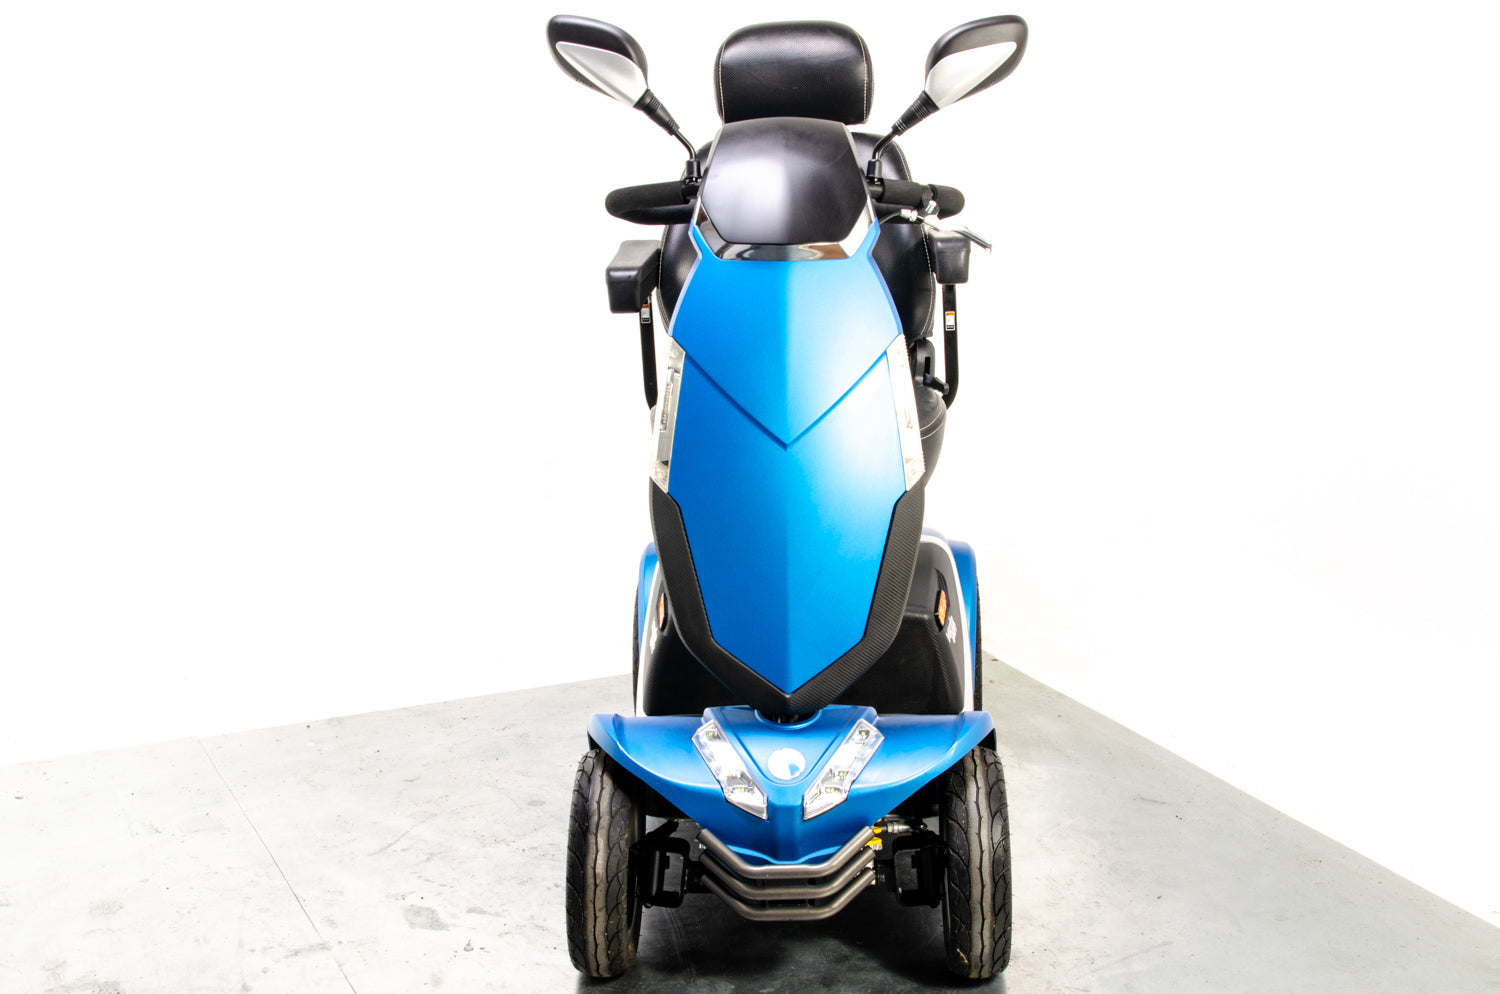 Rascal Vecta Sport Used Electric Mobility Scooter 8mph Suspension Max Grip All-Terrain Road Legal Blue 13319